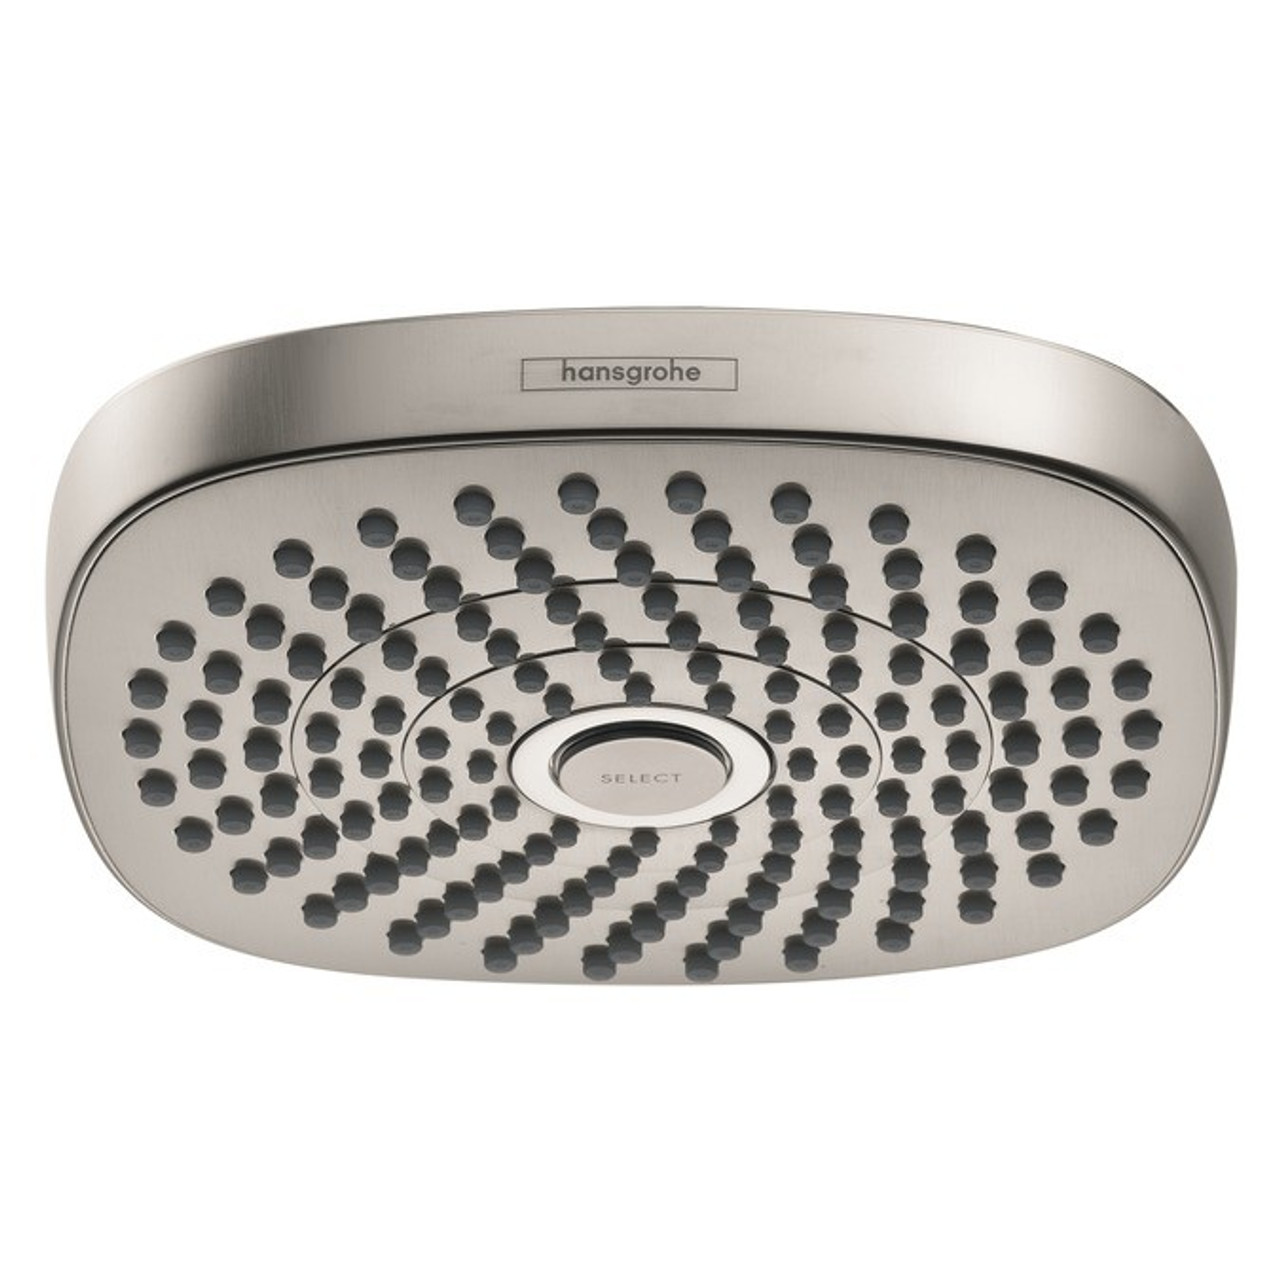 schotel Booth Geurloos Hansgrohe Croma Select E 1.8 GPM 2-Jet Showerhead 180 in Brushed Nickel  04387820 Online - Bath1.com